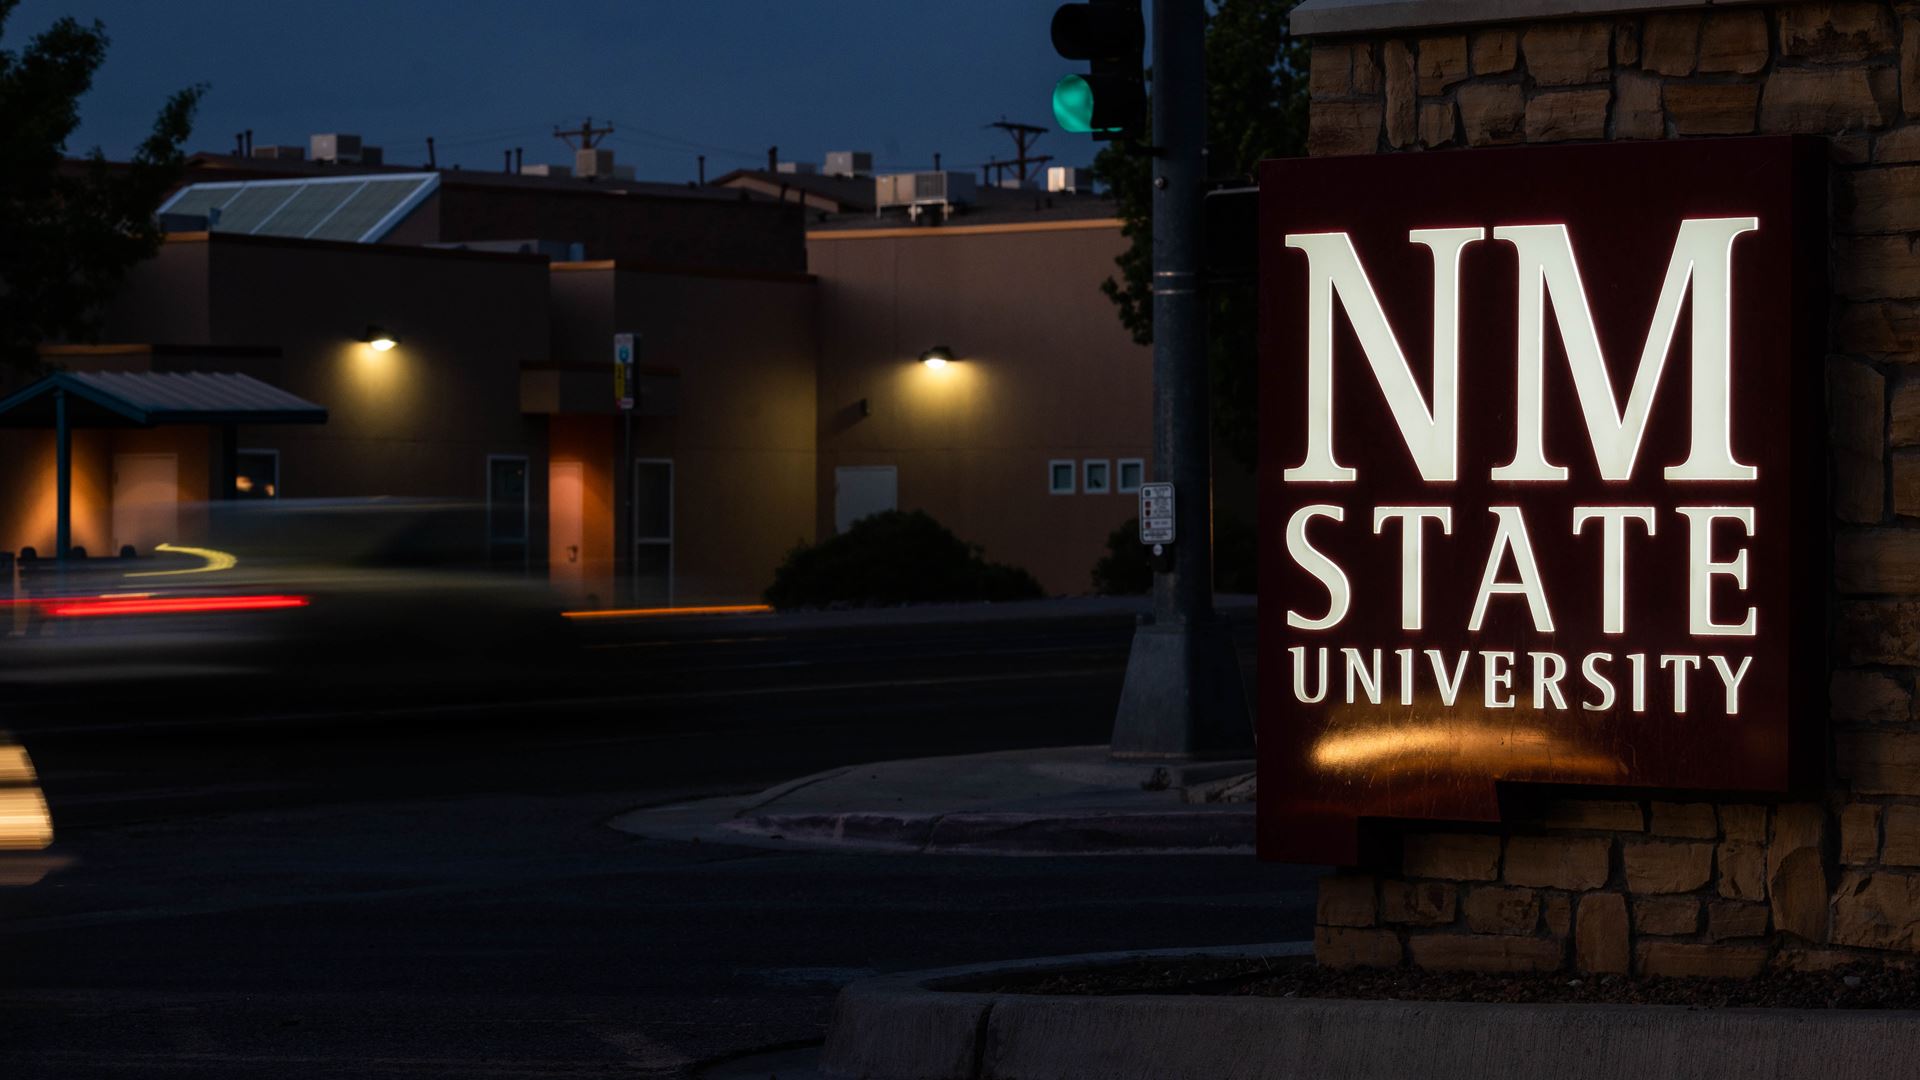 NMSU alumni recognized for distinguished careers, philanthropy and service